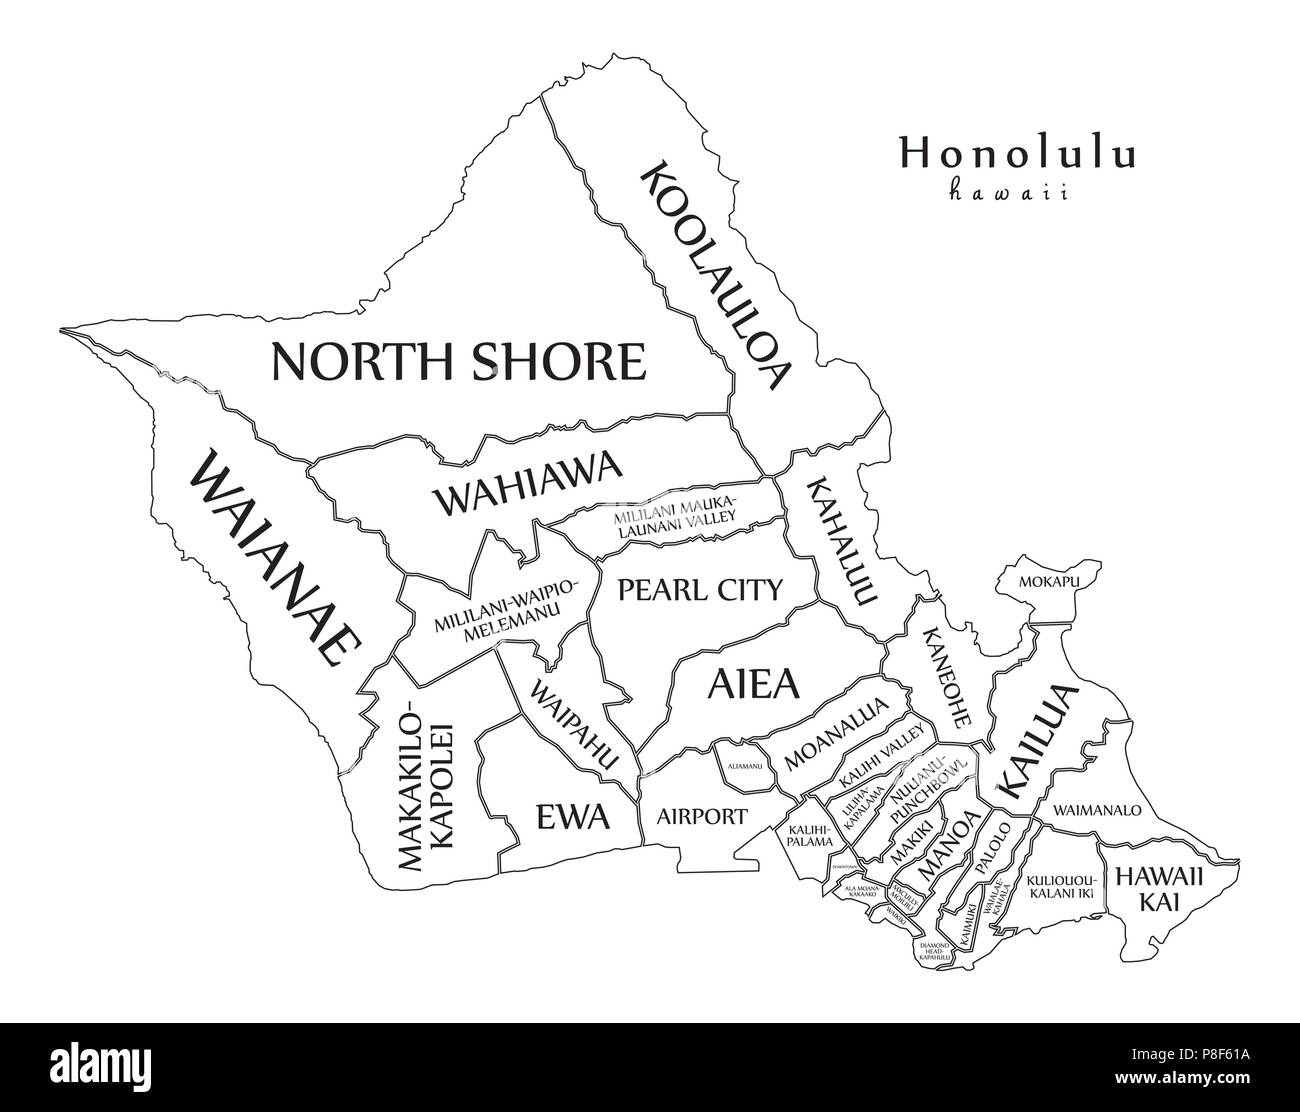 Modern City Map - Honolulu Hawaii city of the USA with neighborhoods and titles outline map Stock Vector